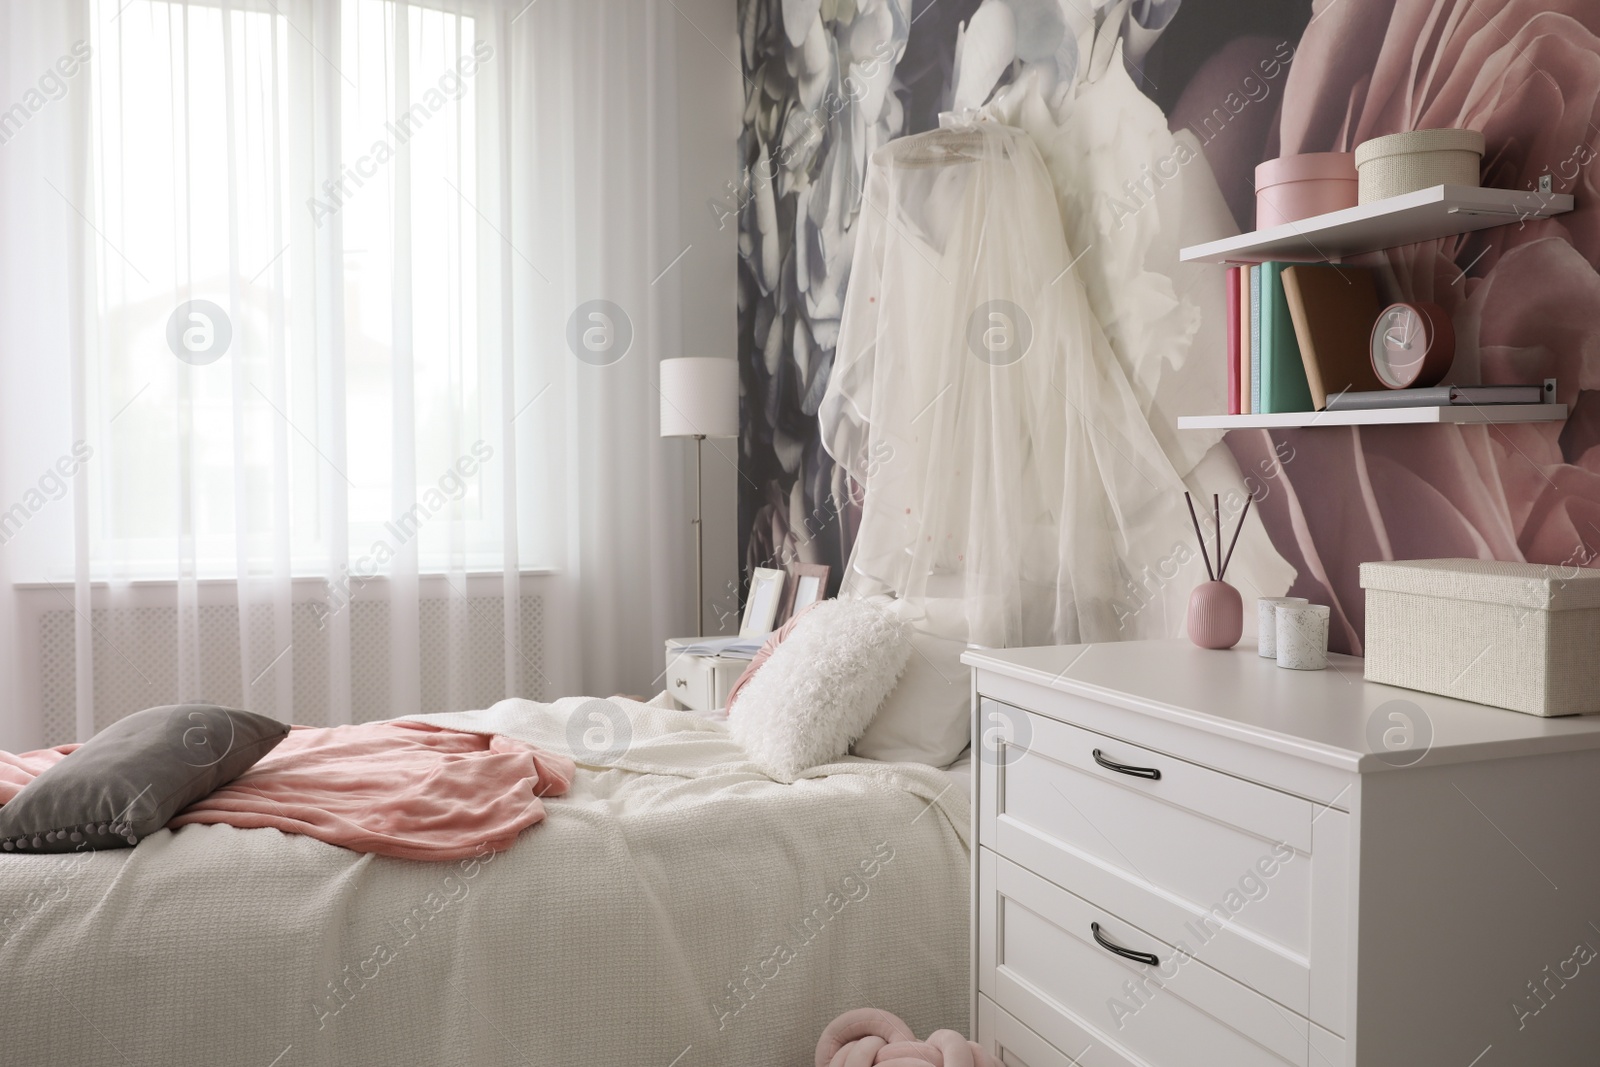 Photo of Teenage girl's room interior with comfortable bed, chest of drawers and floral wallpaper. Idea for stylish design